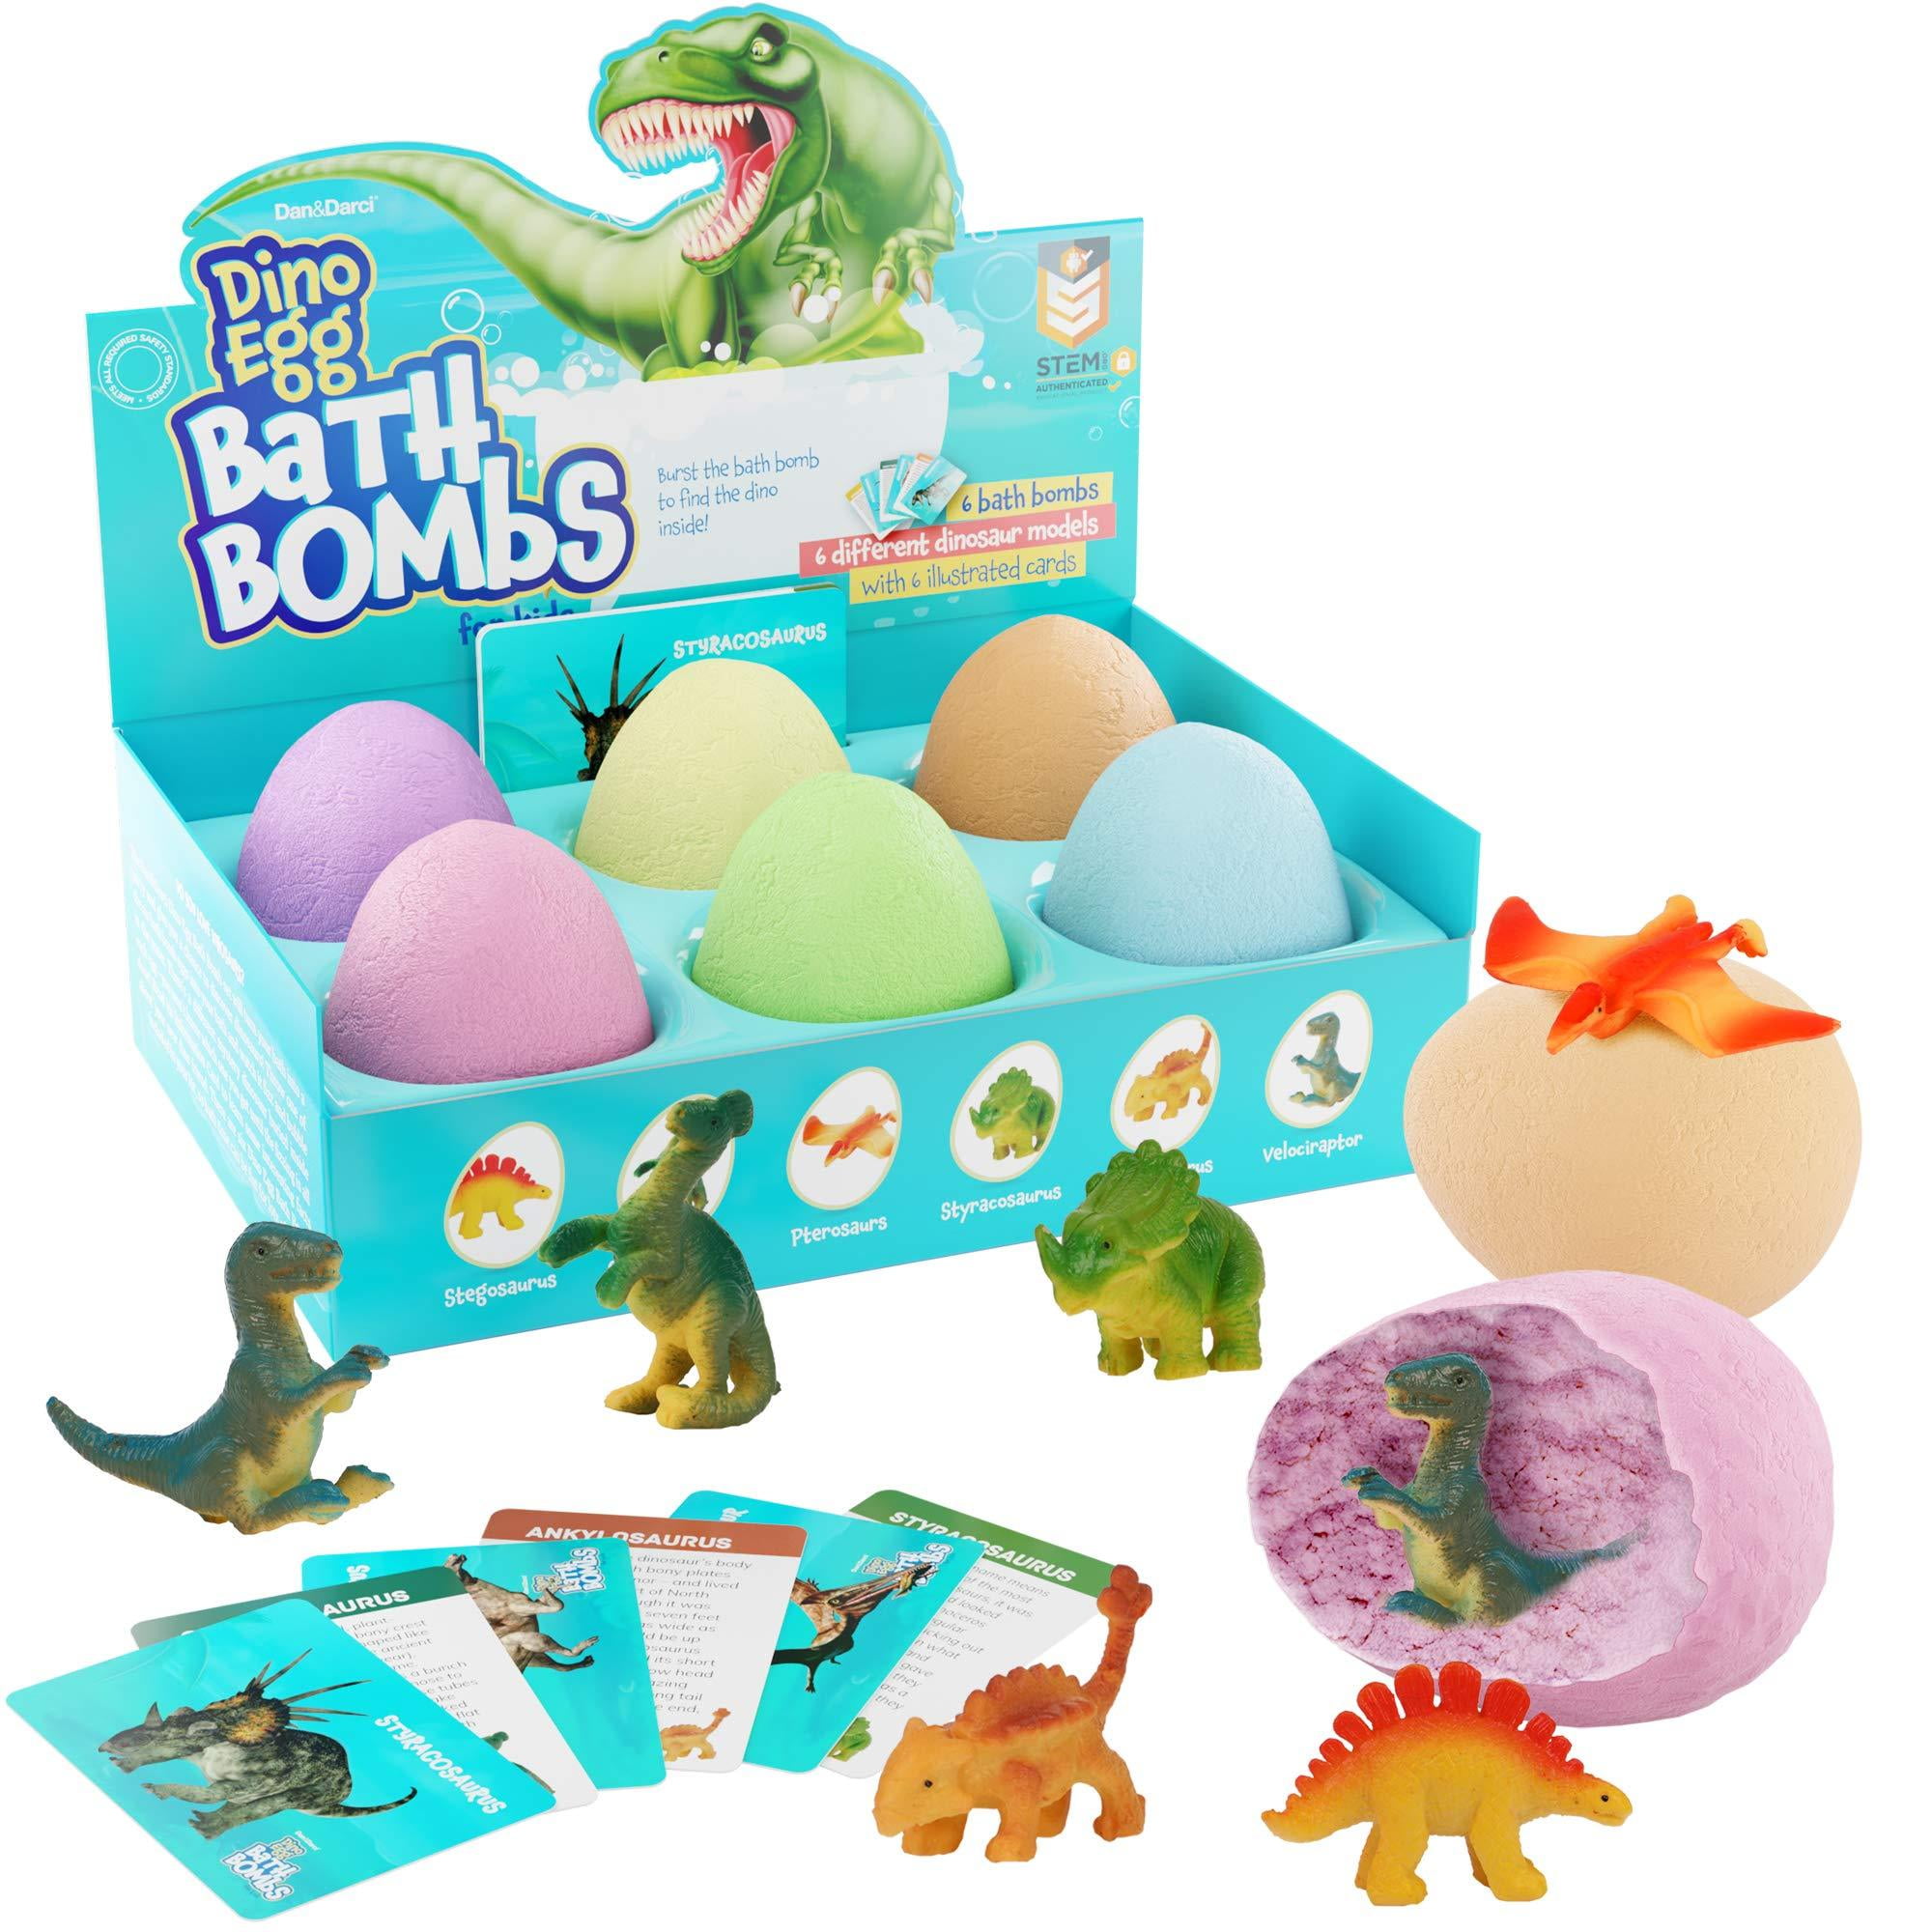 Dino Egg Bath Bombs with Surprise Inside for Kids - Dinosaur in Each